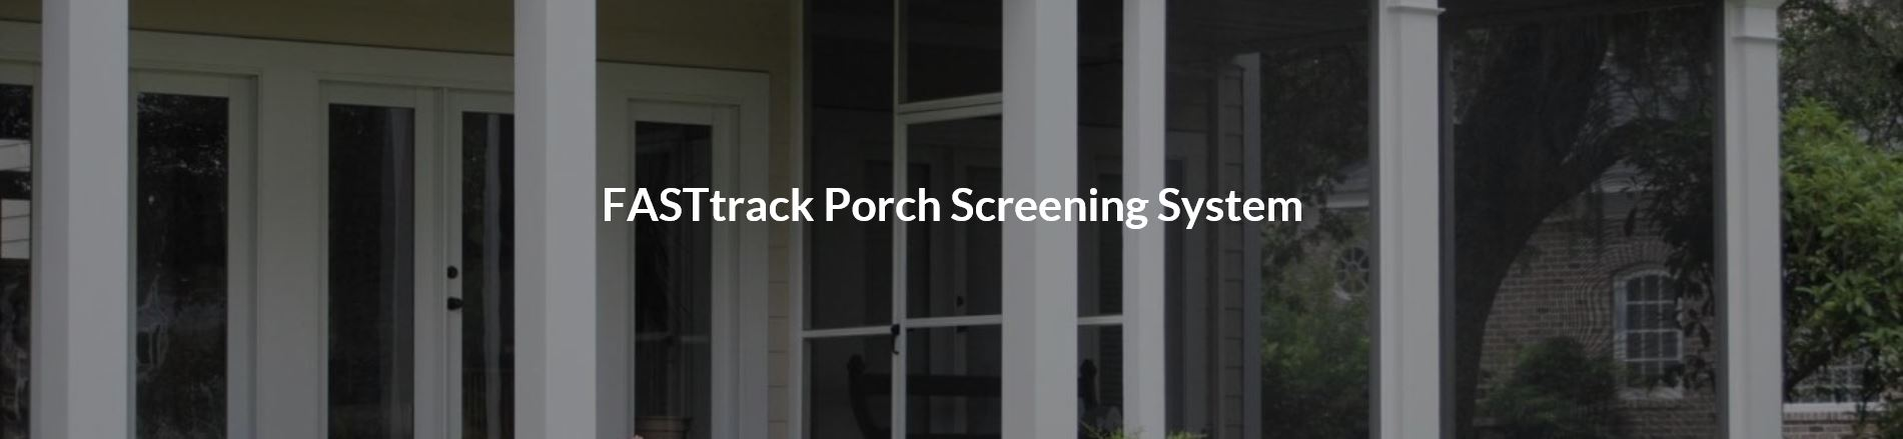 Fast Track Porch Screneing System. For screened patios and porches.